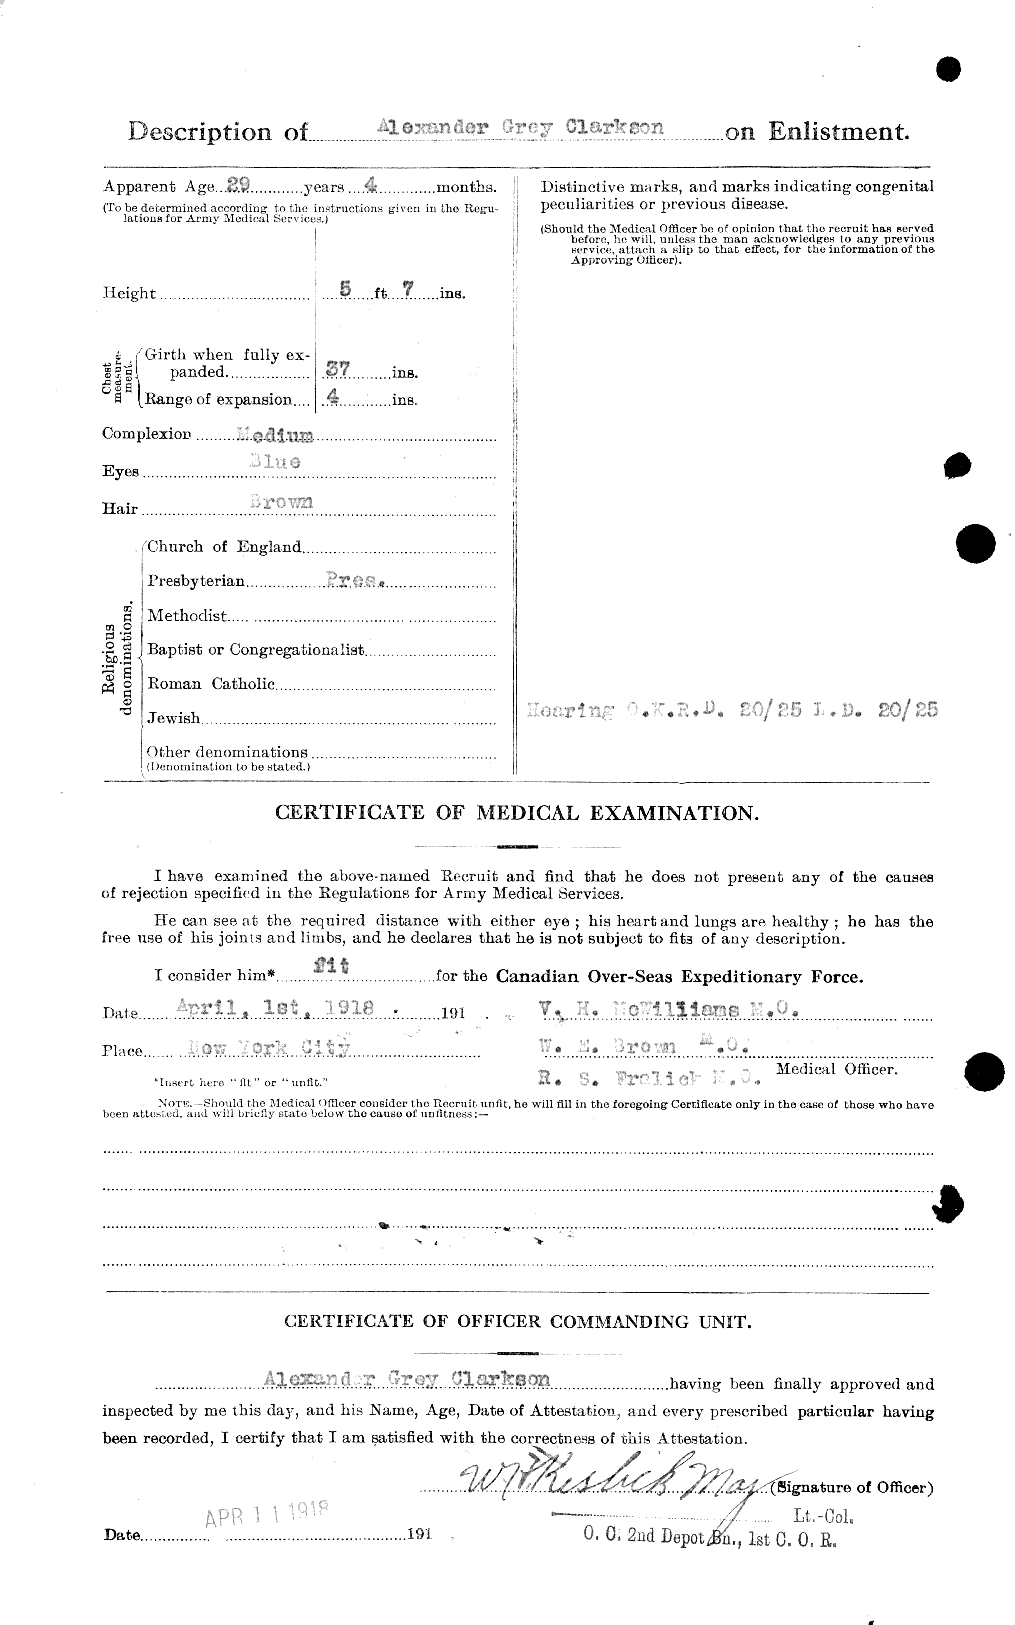 Personnel Records of the First World War - CEF 023612b